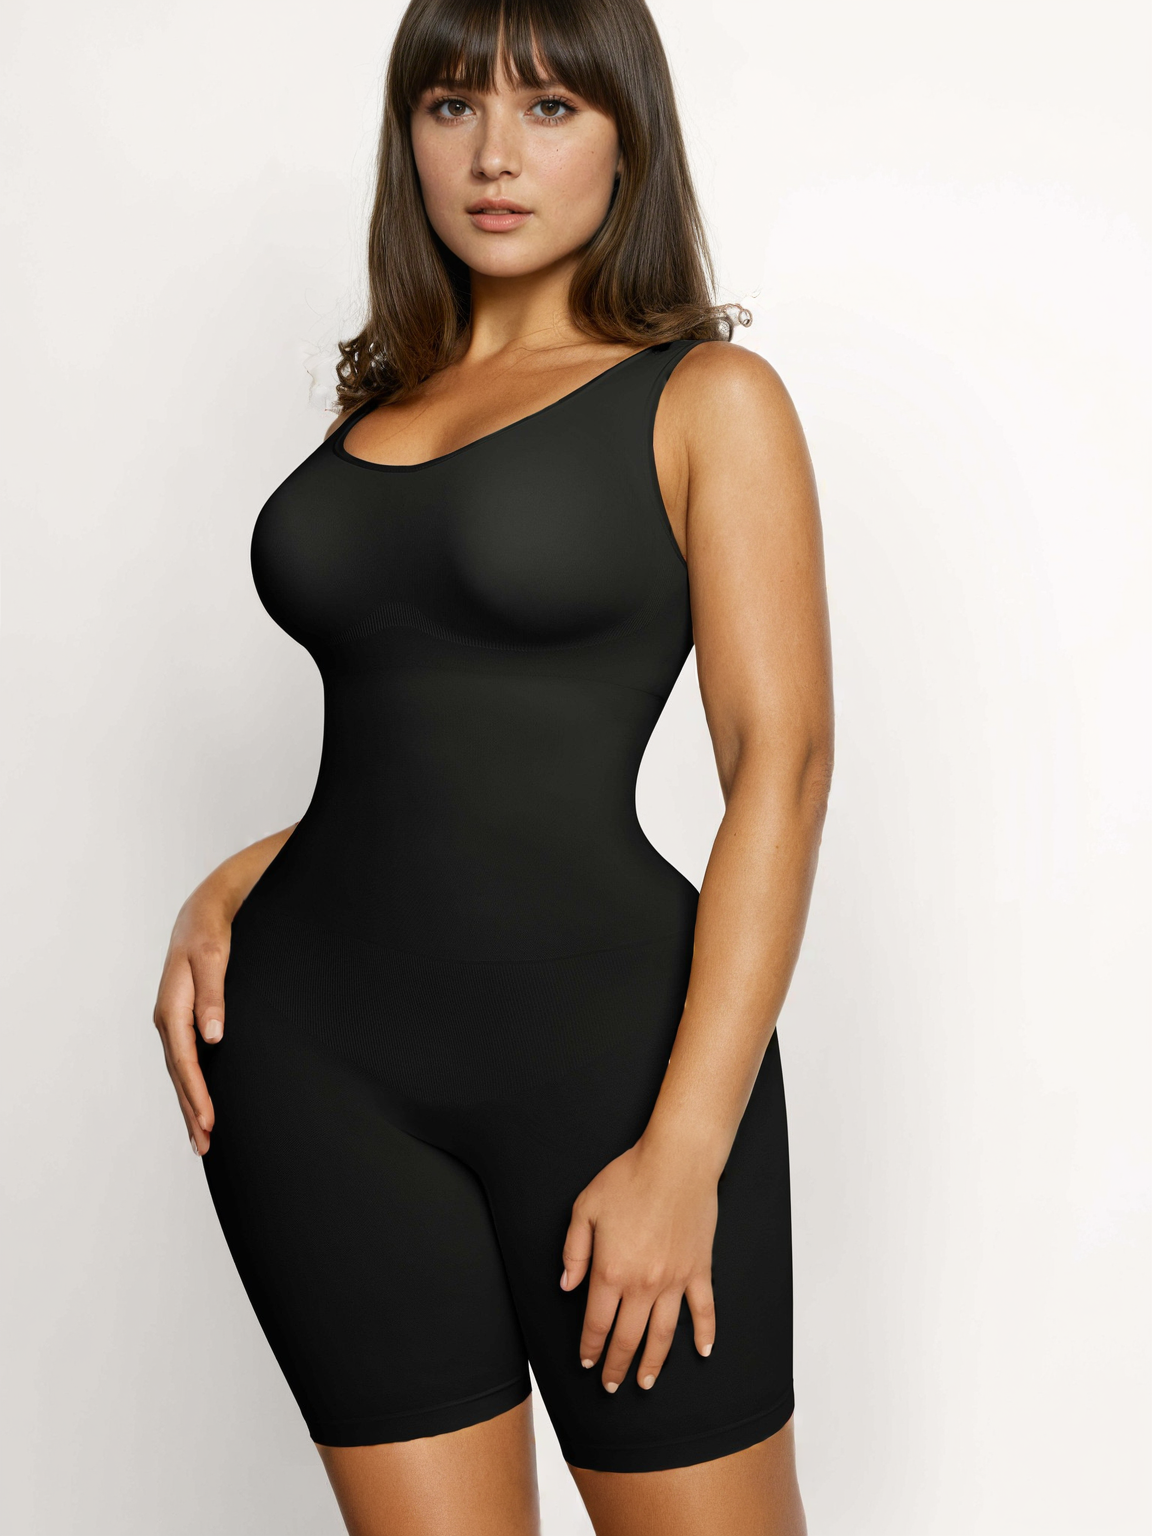 Wholesale Tight Girdles To Create Slim And Fit Looking Silhouettes 